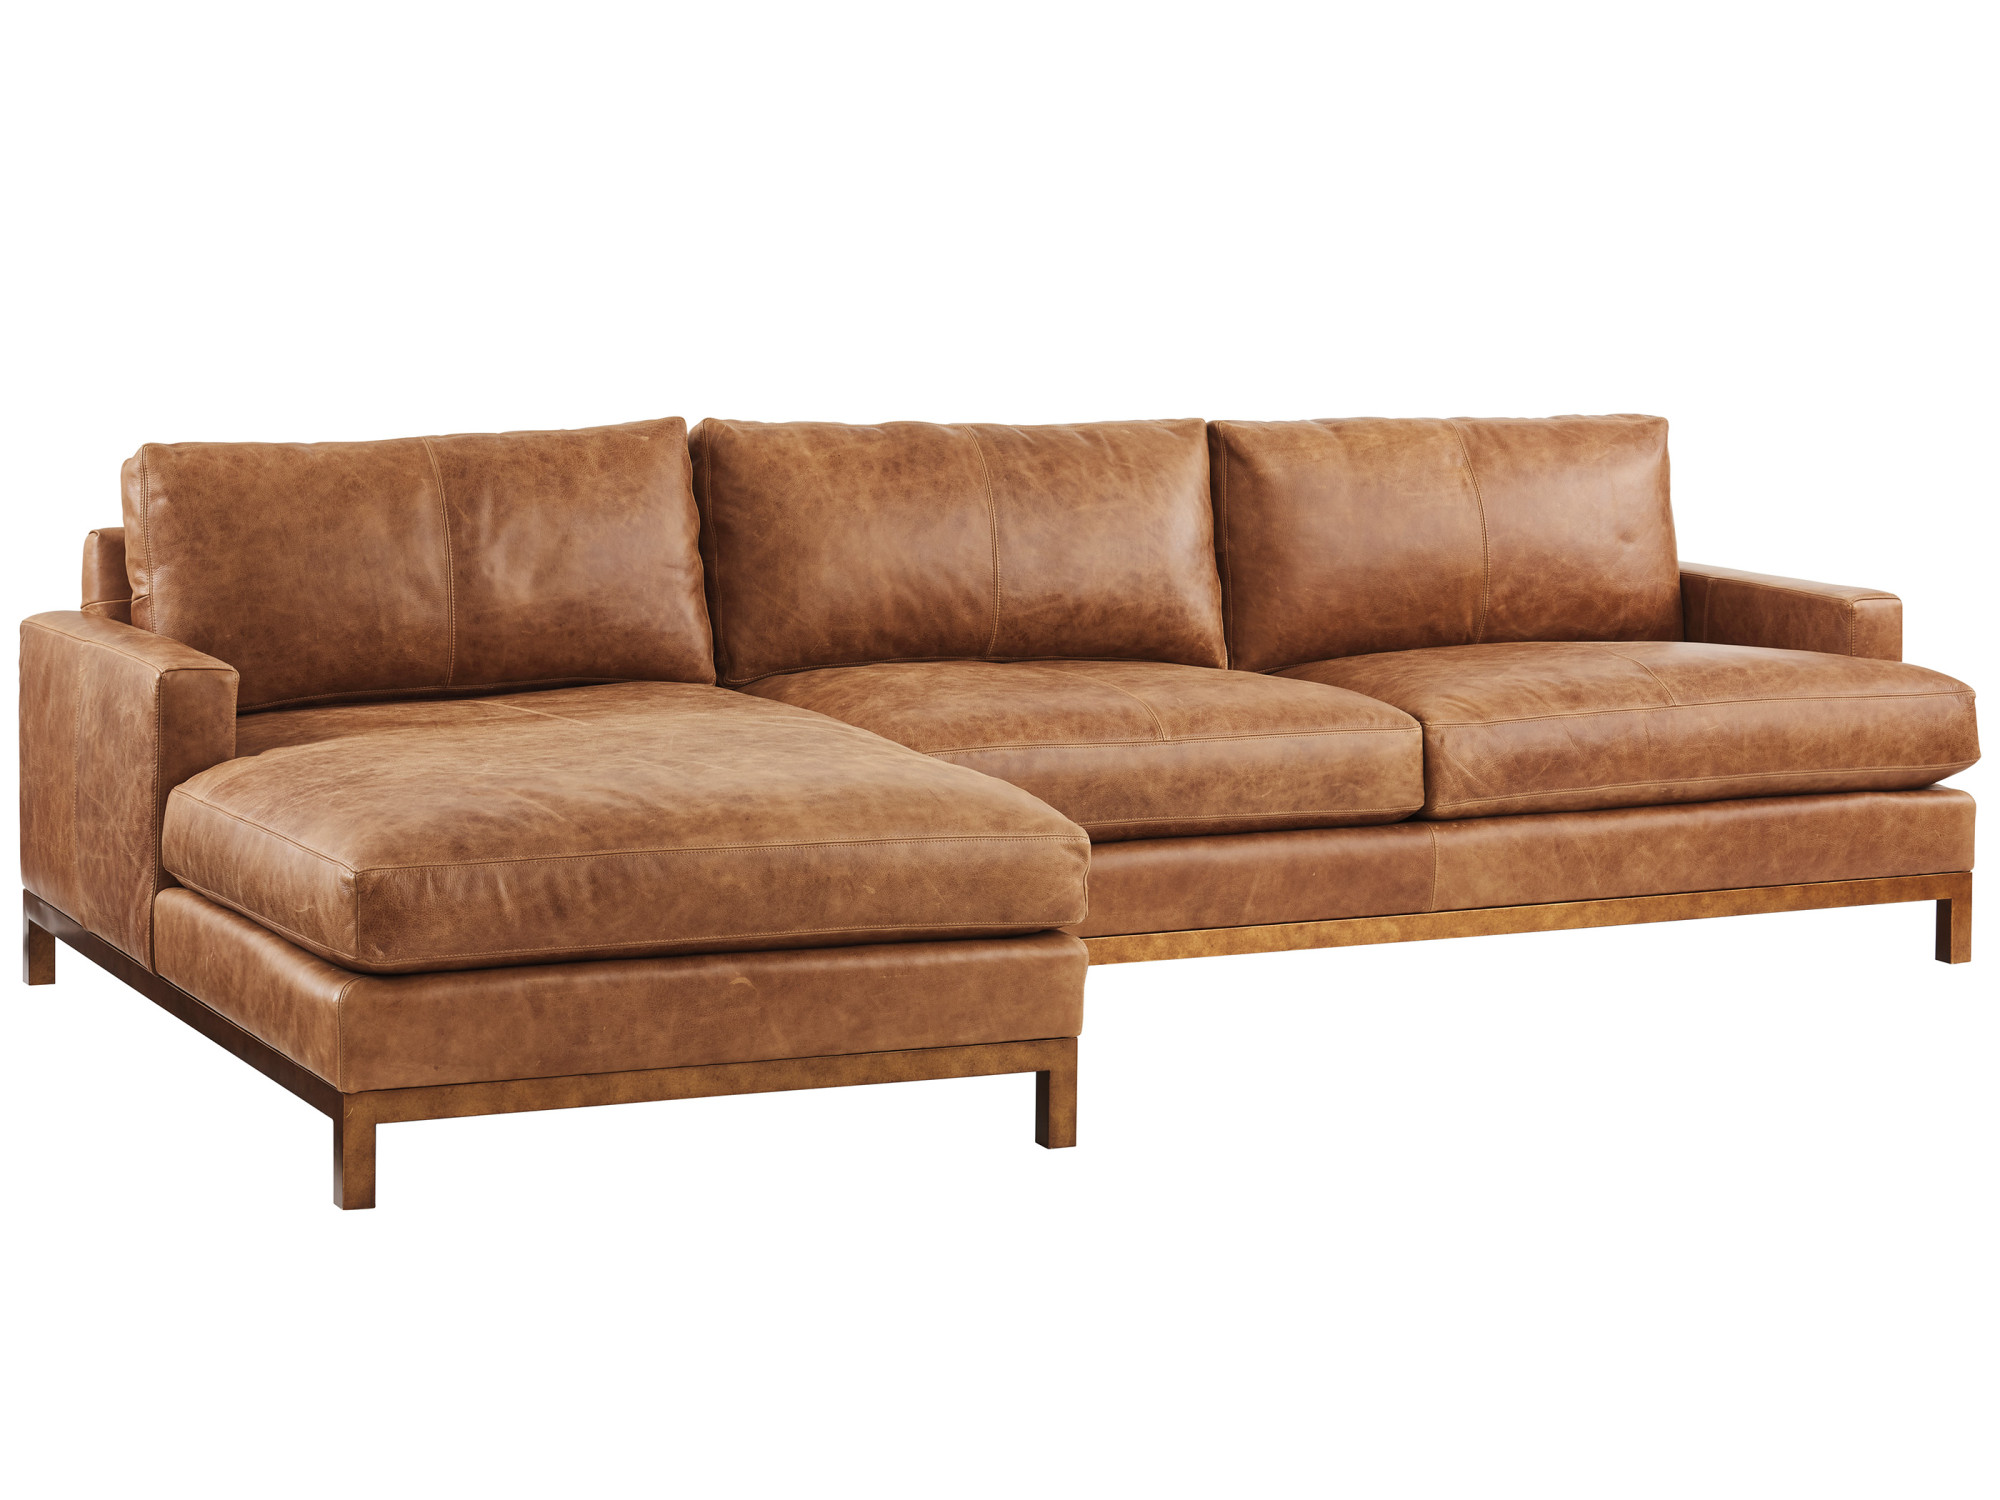 Horizon Leather Sofa Chaise Lexington, Brown Leather Couch With Chaise